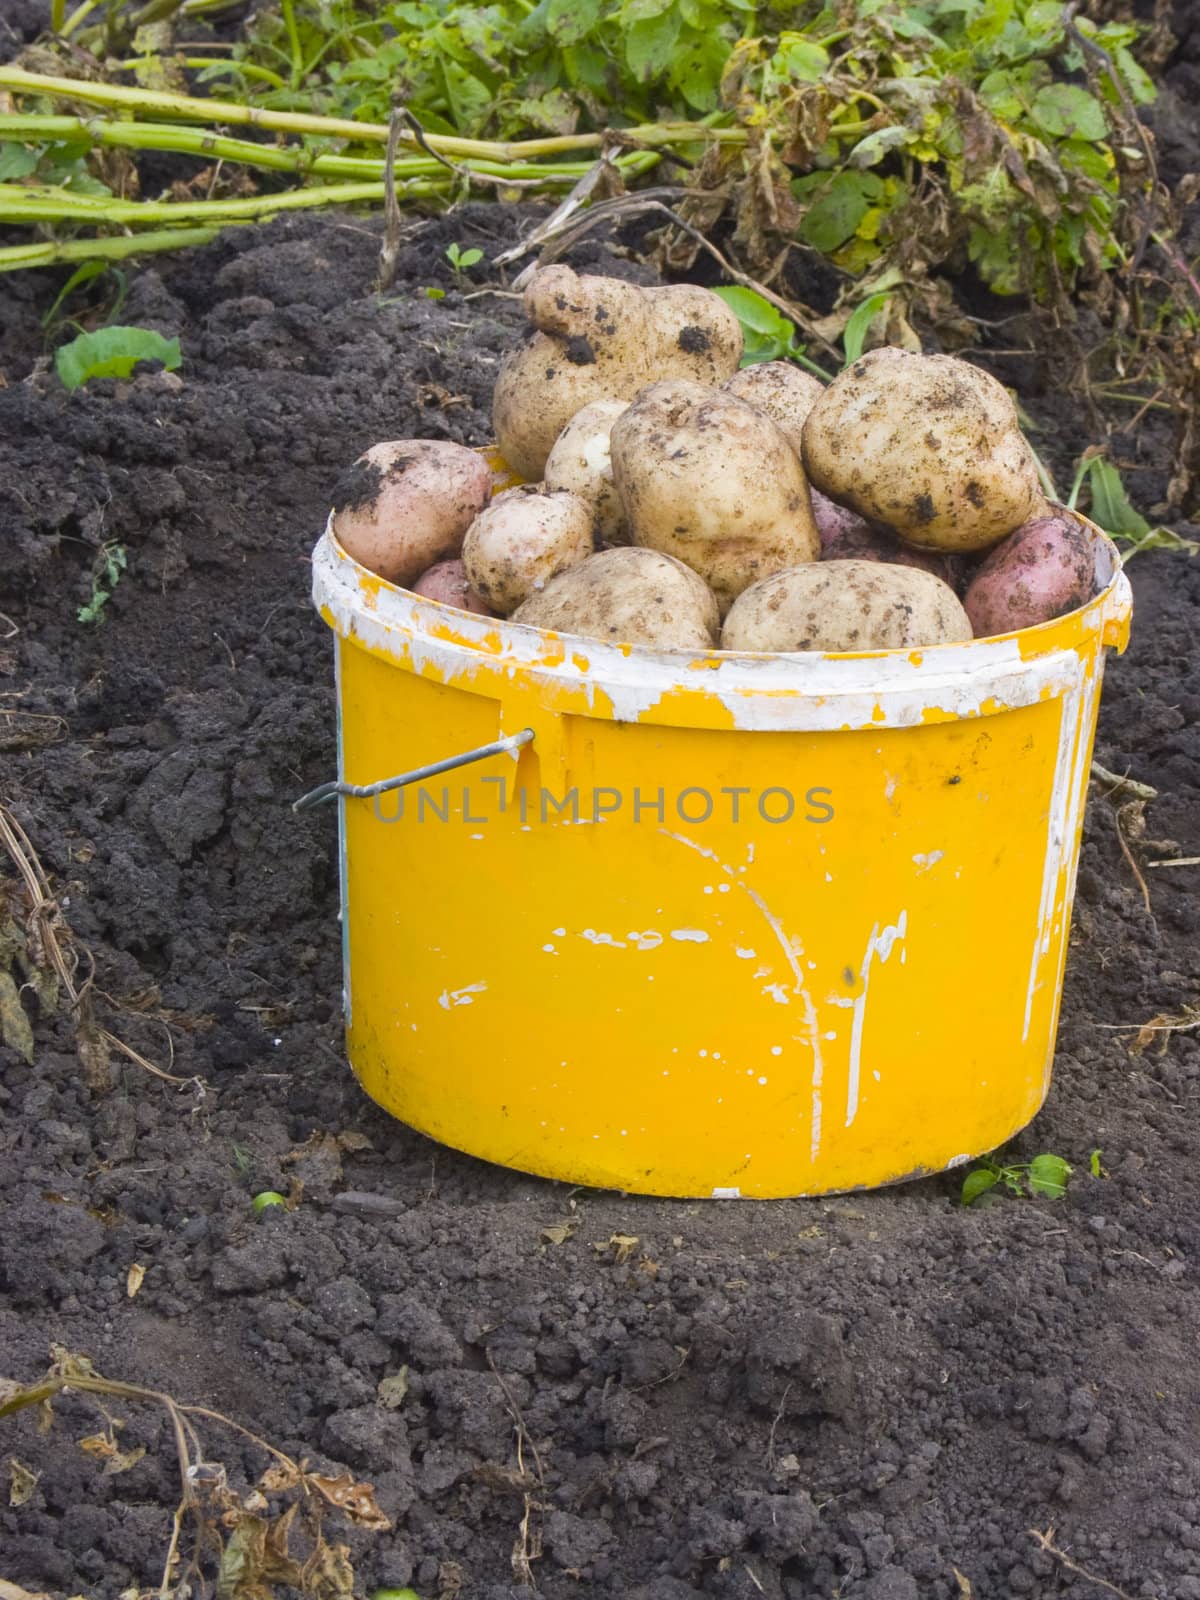 The bucket image in which have combined just dug out potato